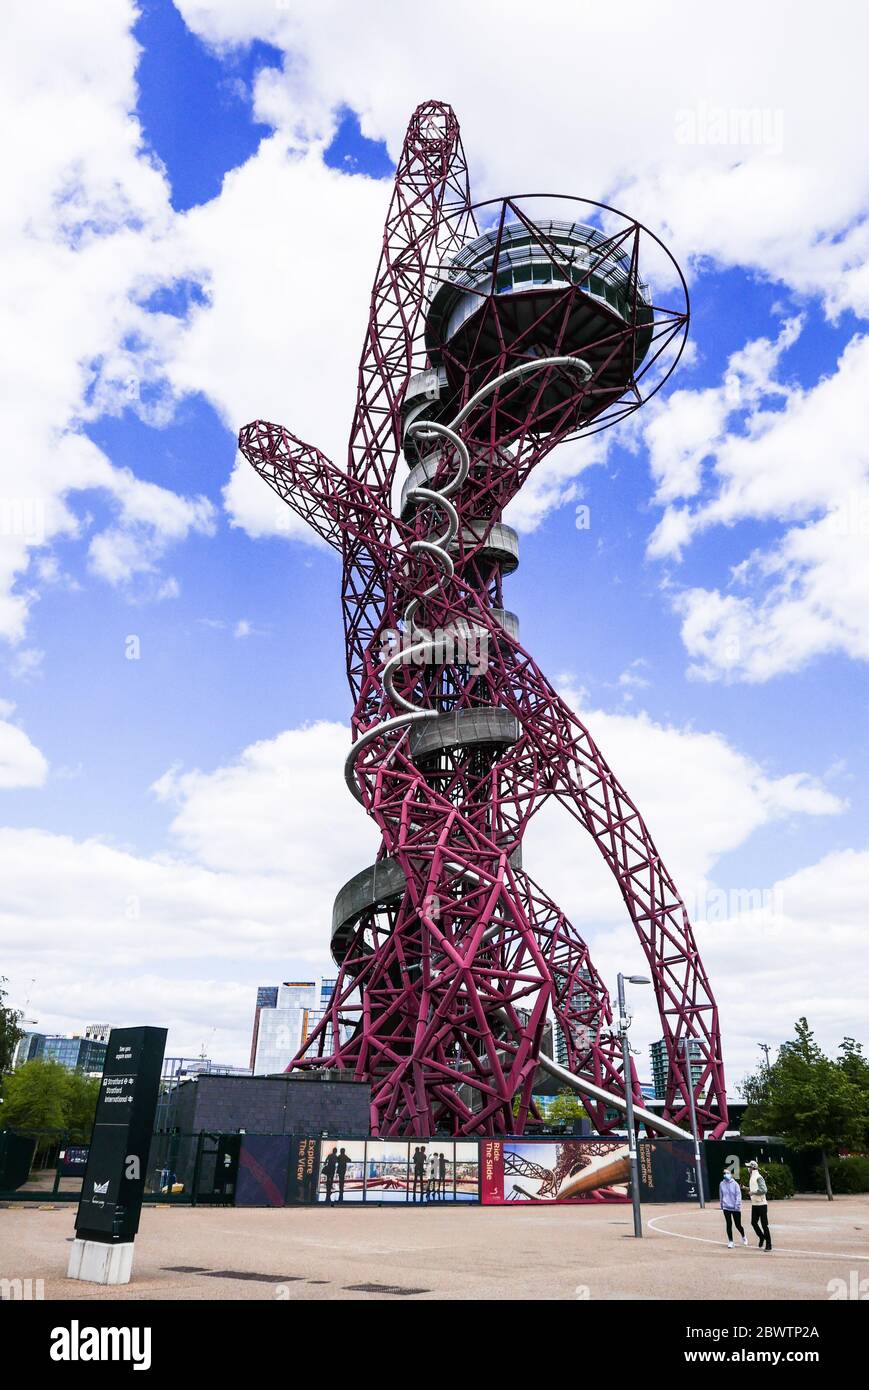 Arcelor Mittal Orbit  on Corona  Virus lock down and passers by with mask Stock Photo